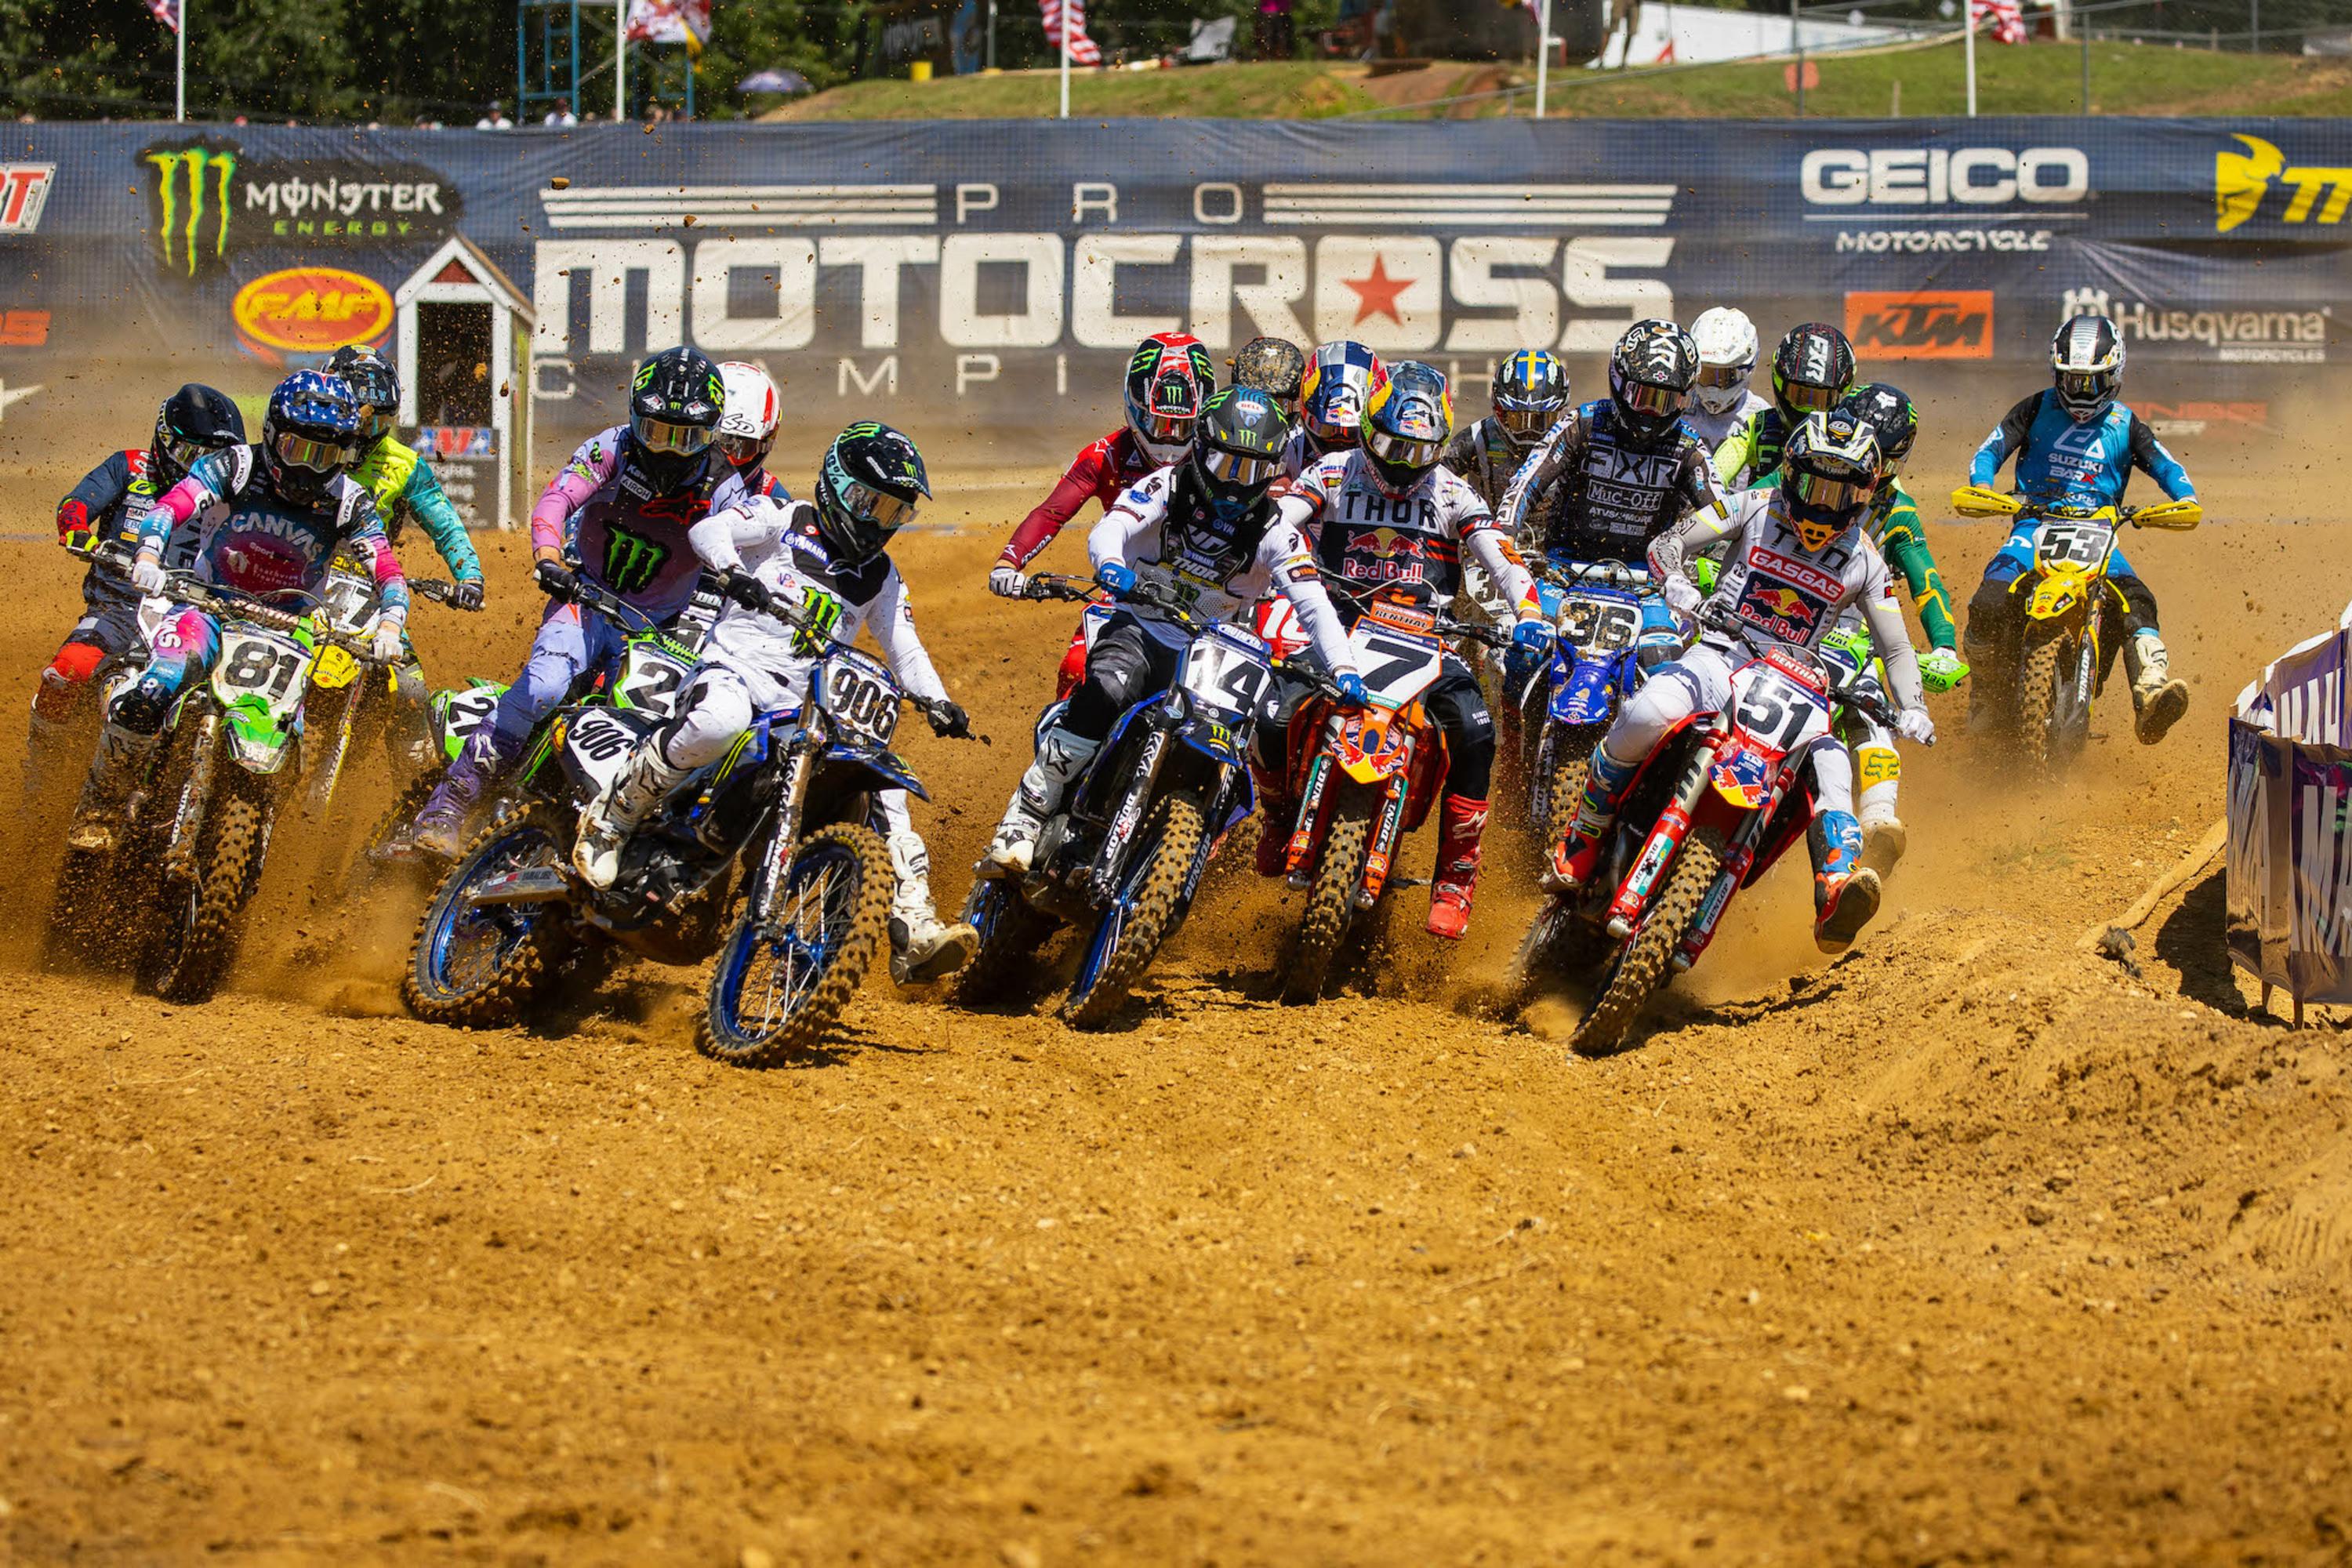 Pro Motocross start date to be pushed back further 